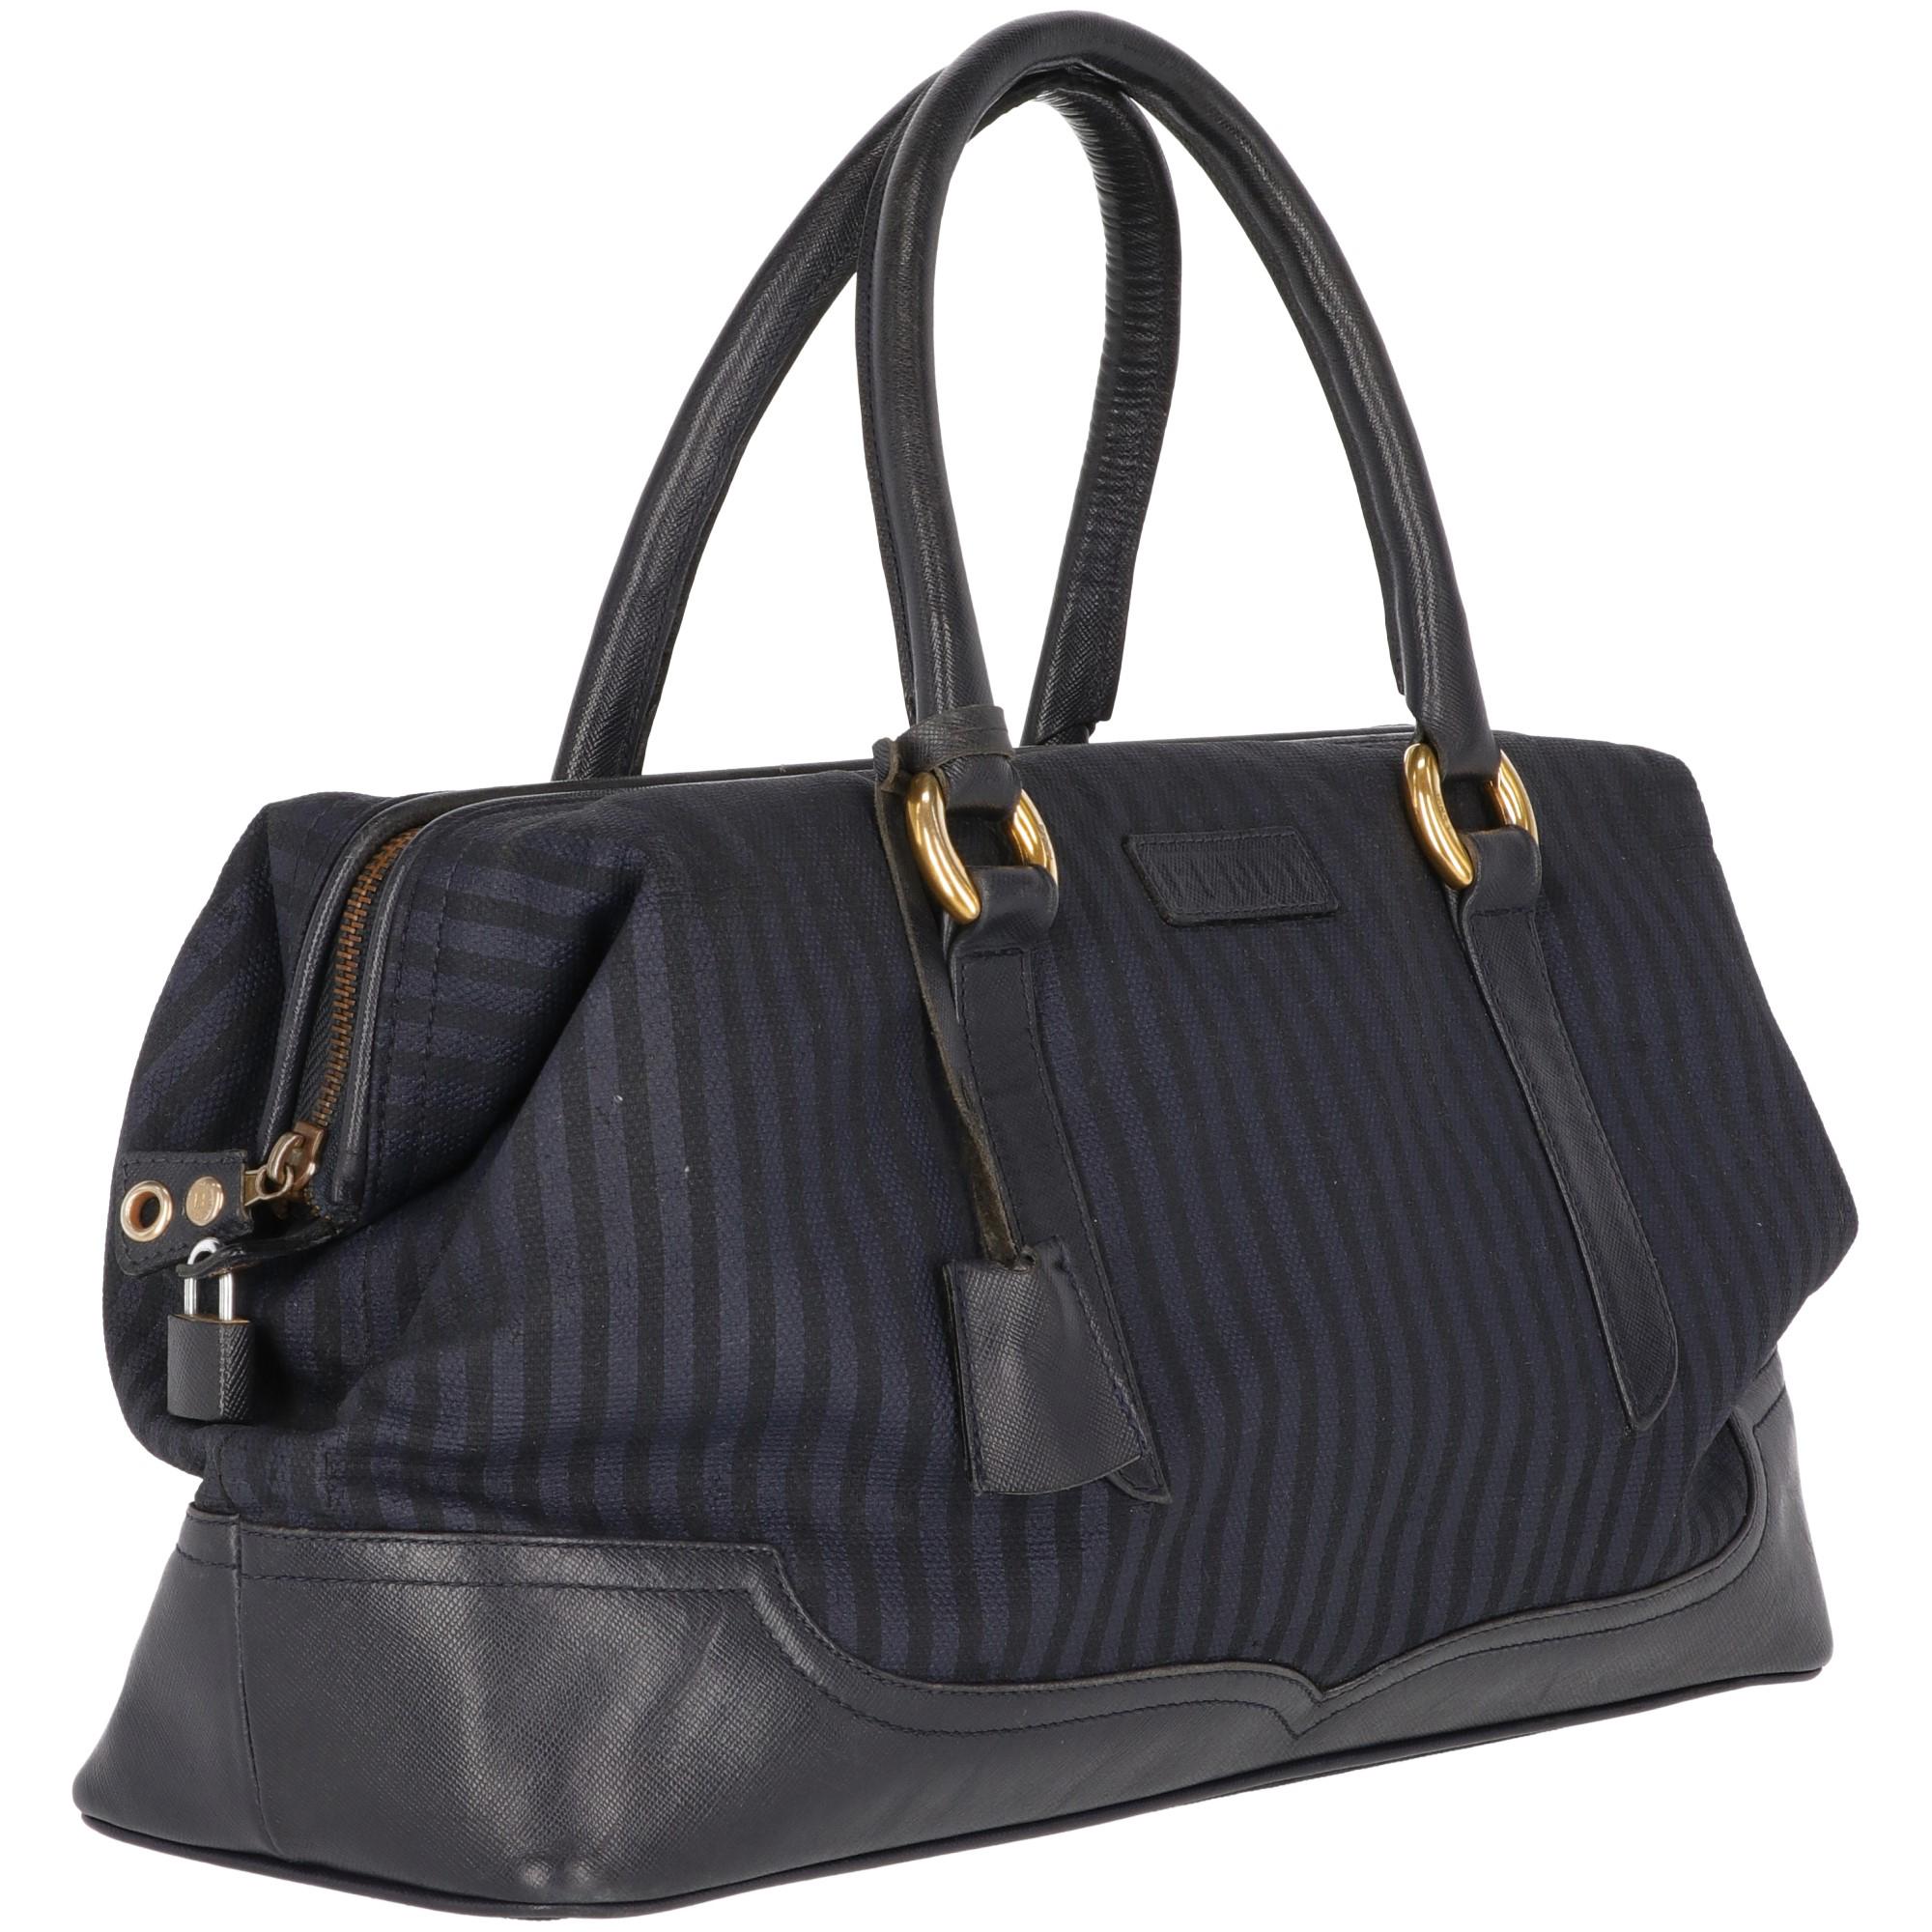 Fendi light and dark blue vertical stripes printed fabric handbag with blue leather handles and inserts, with zip fastening and gold-tone metal branded buckles. With blue leather real leather lining, inner zip pocket with gold-tone metal label. The